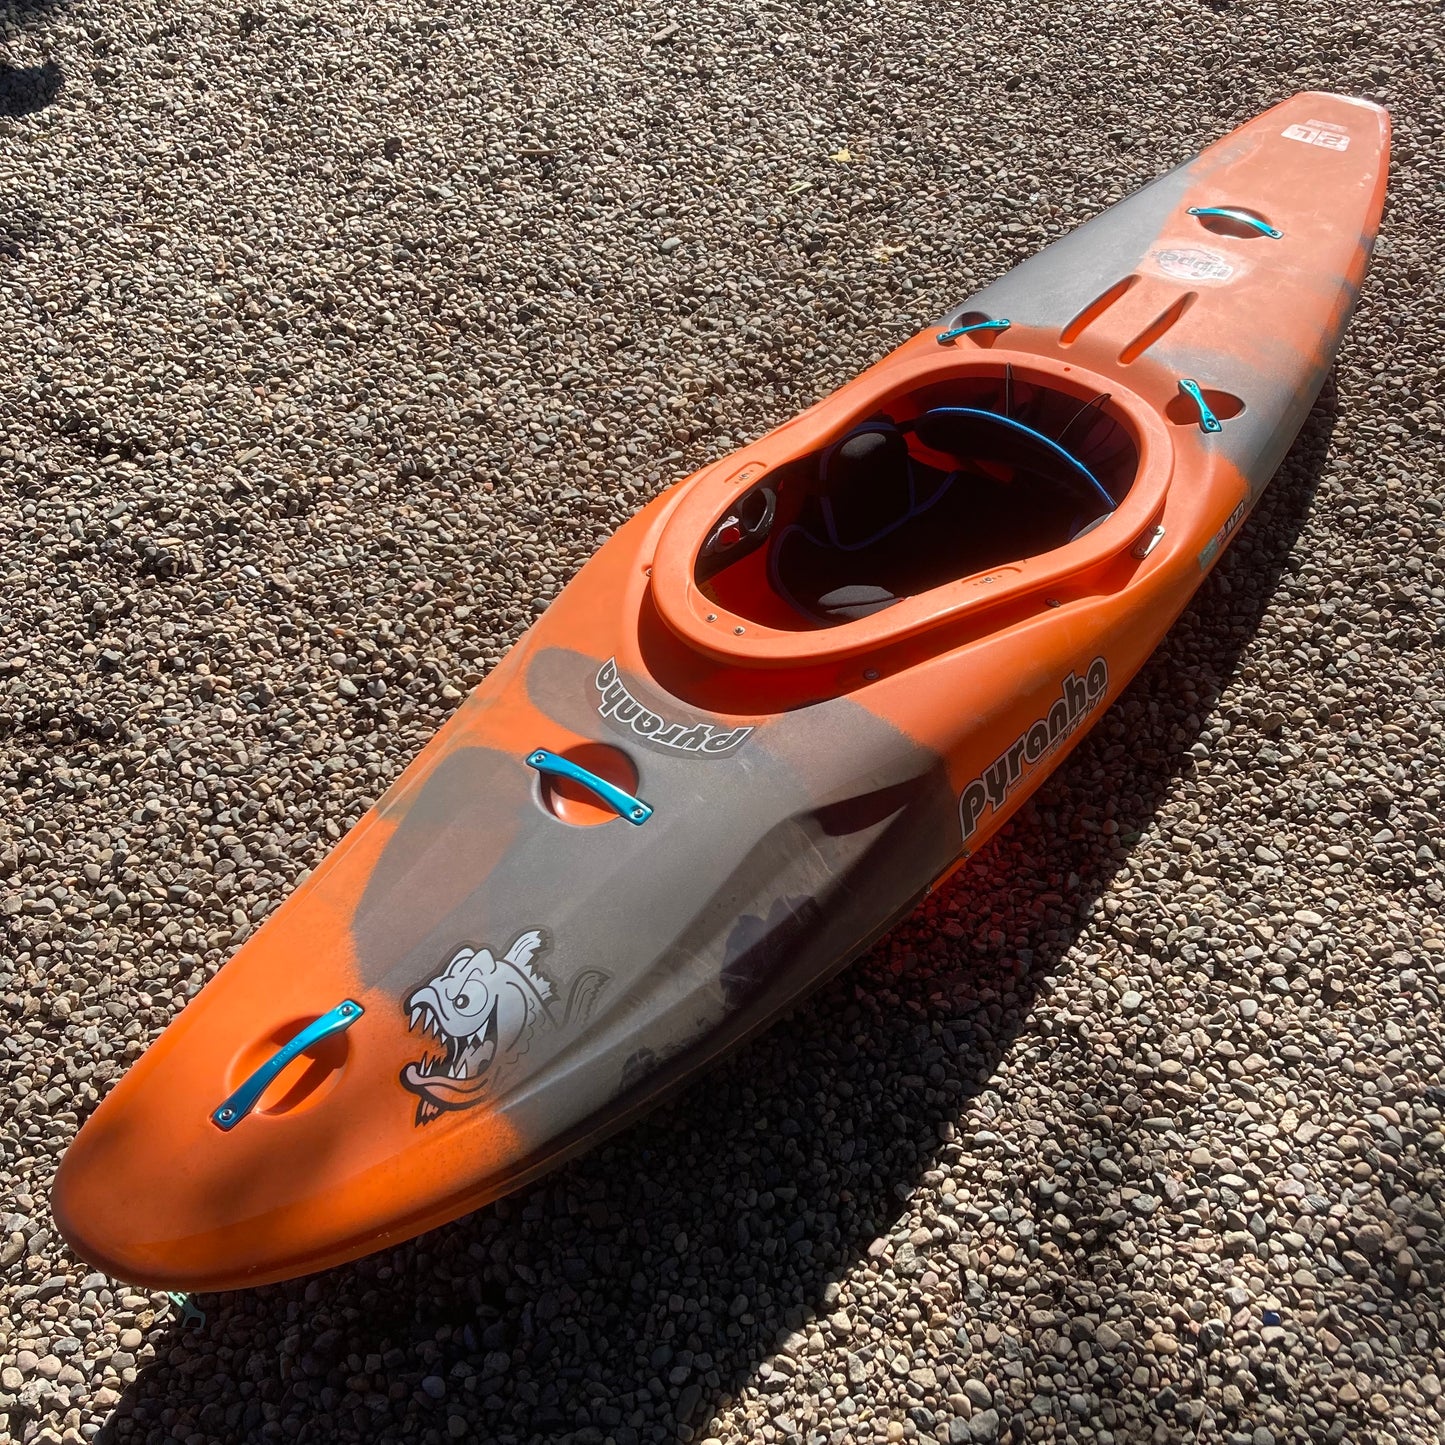 An orange and black Demo Ripper 2.0 LG kayak sitting on the ground, made by Pyranha.